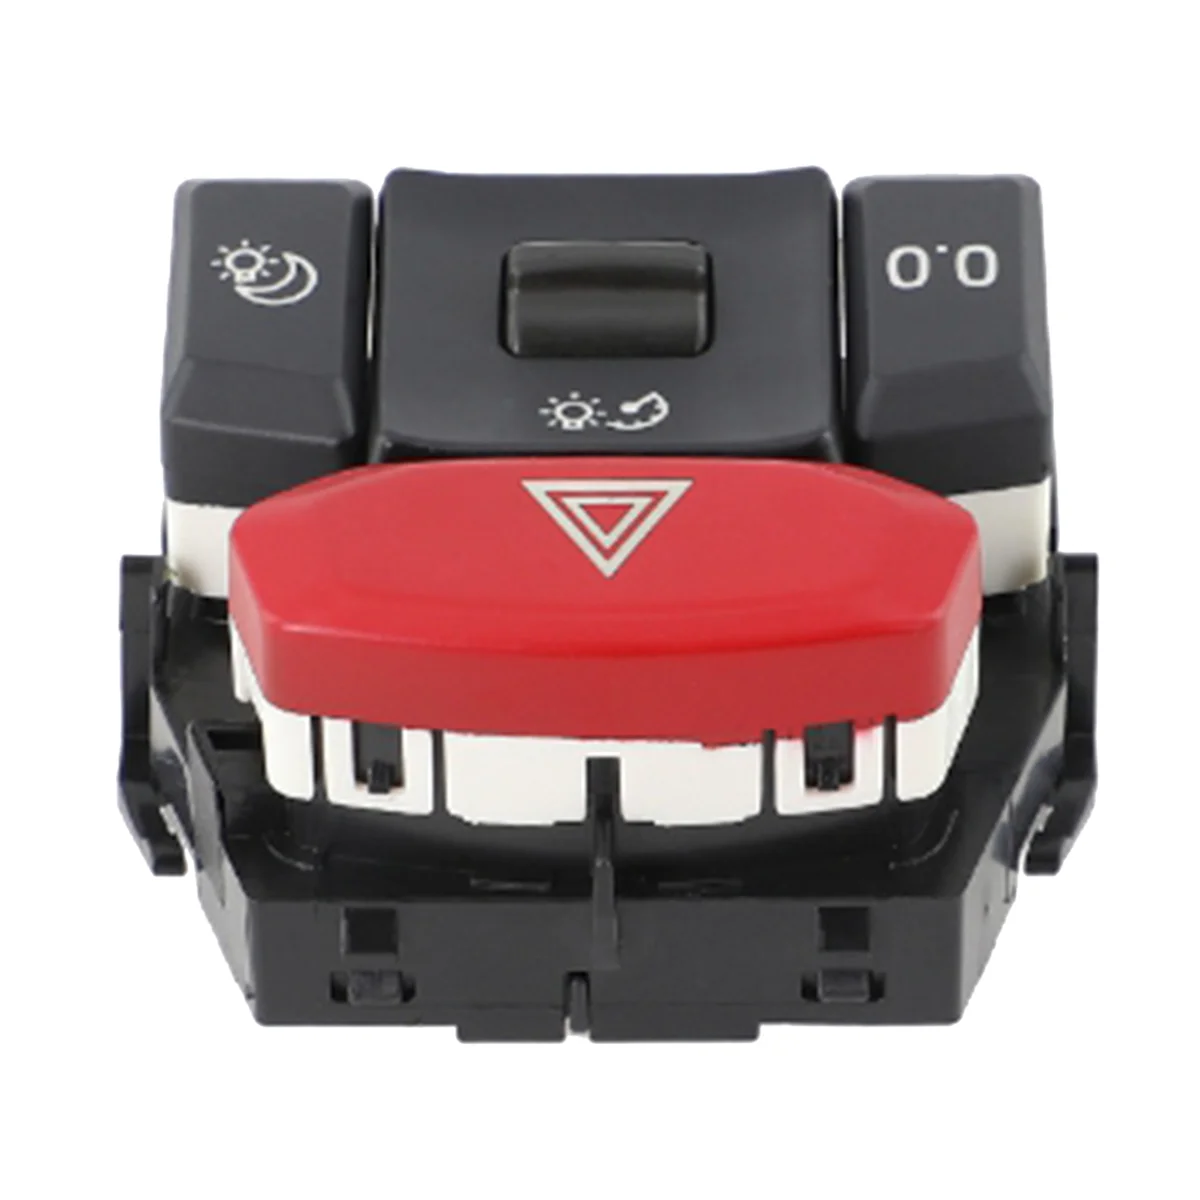 

2095860 Hazard Lamp Light Warning Indicator Switch Button for SCANIA R-Series Truck Accessories